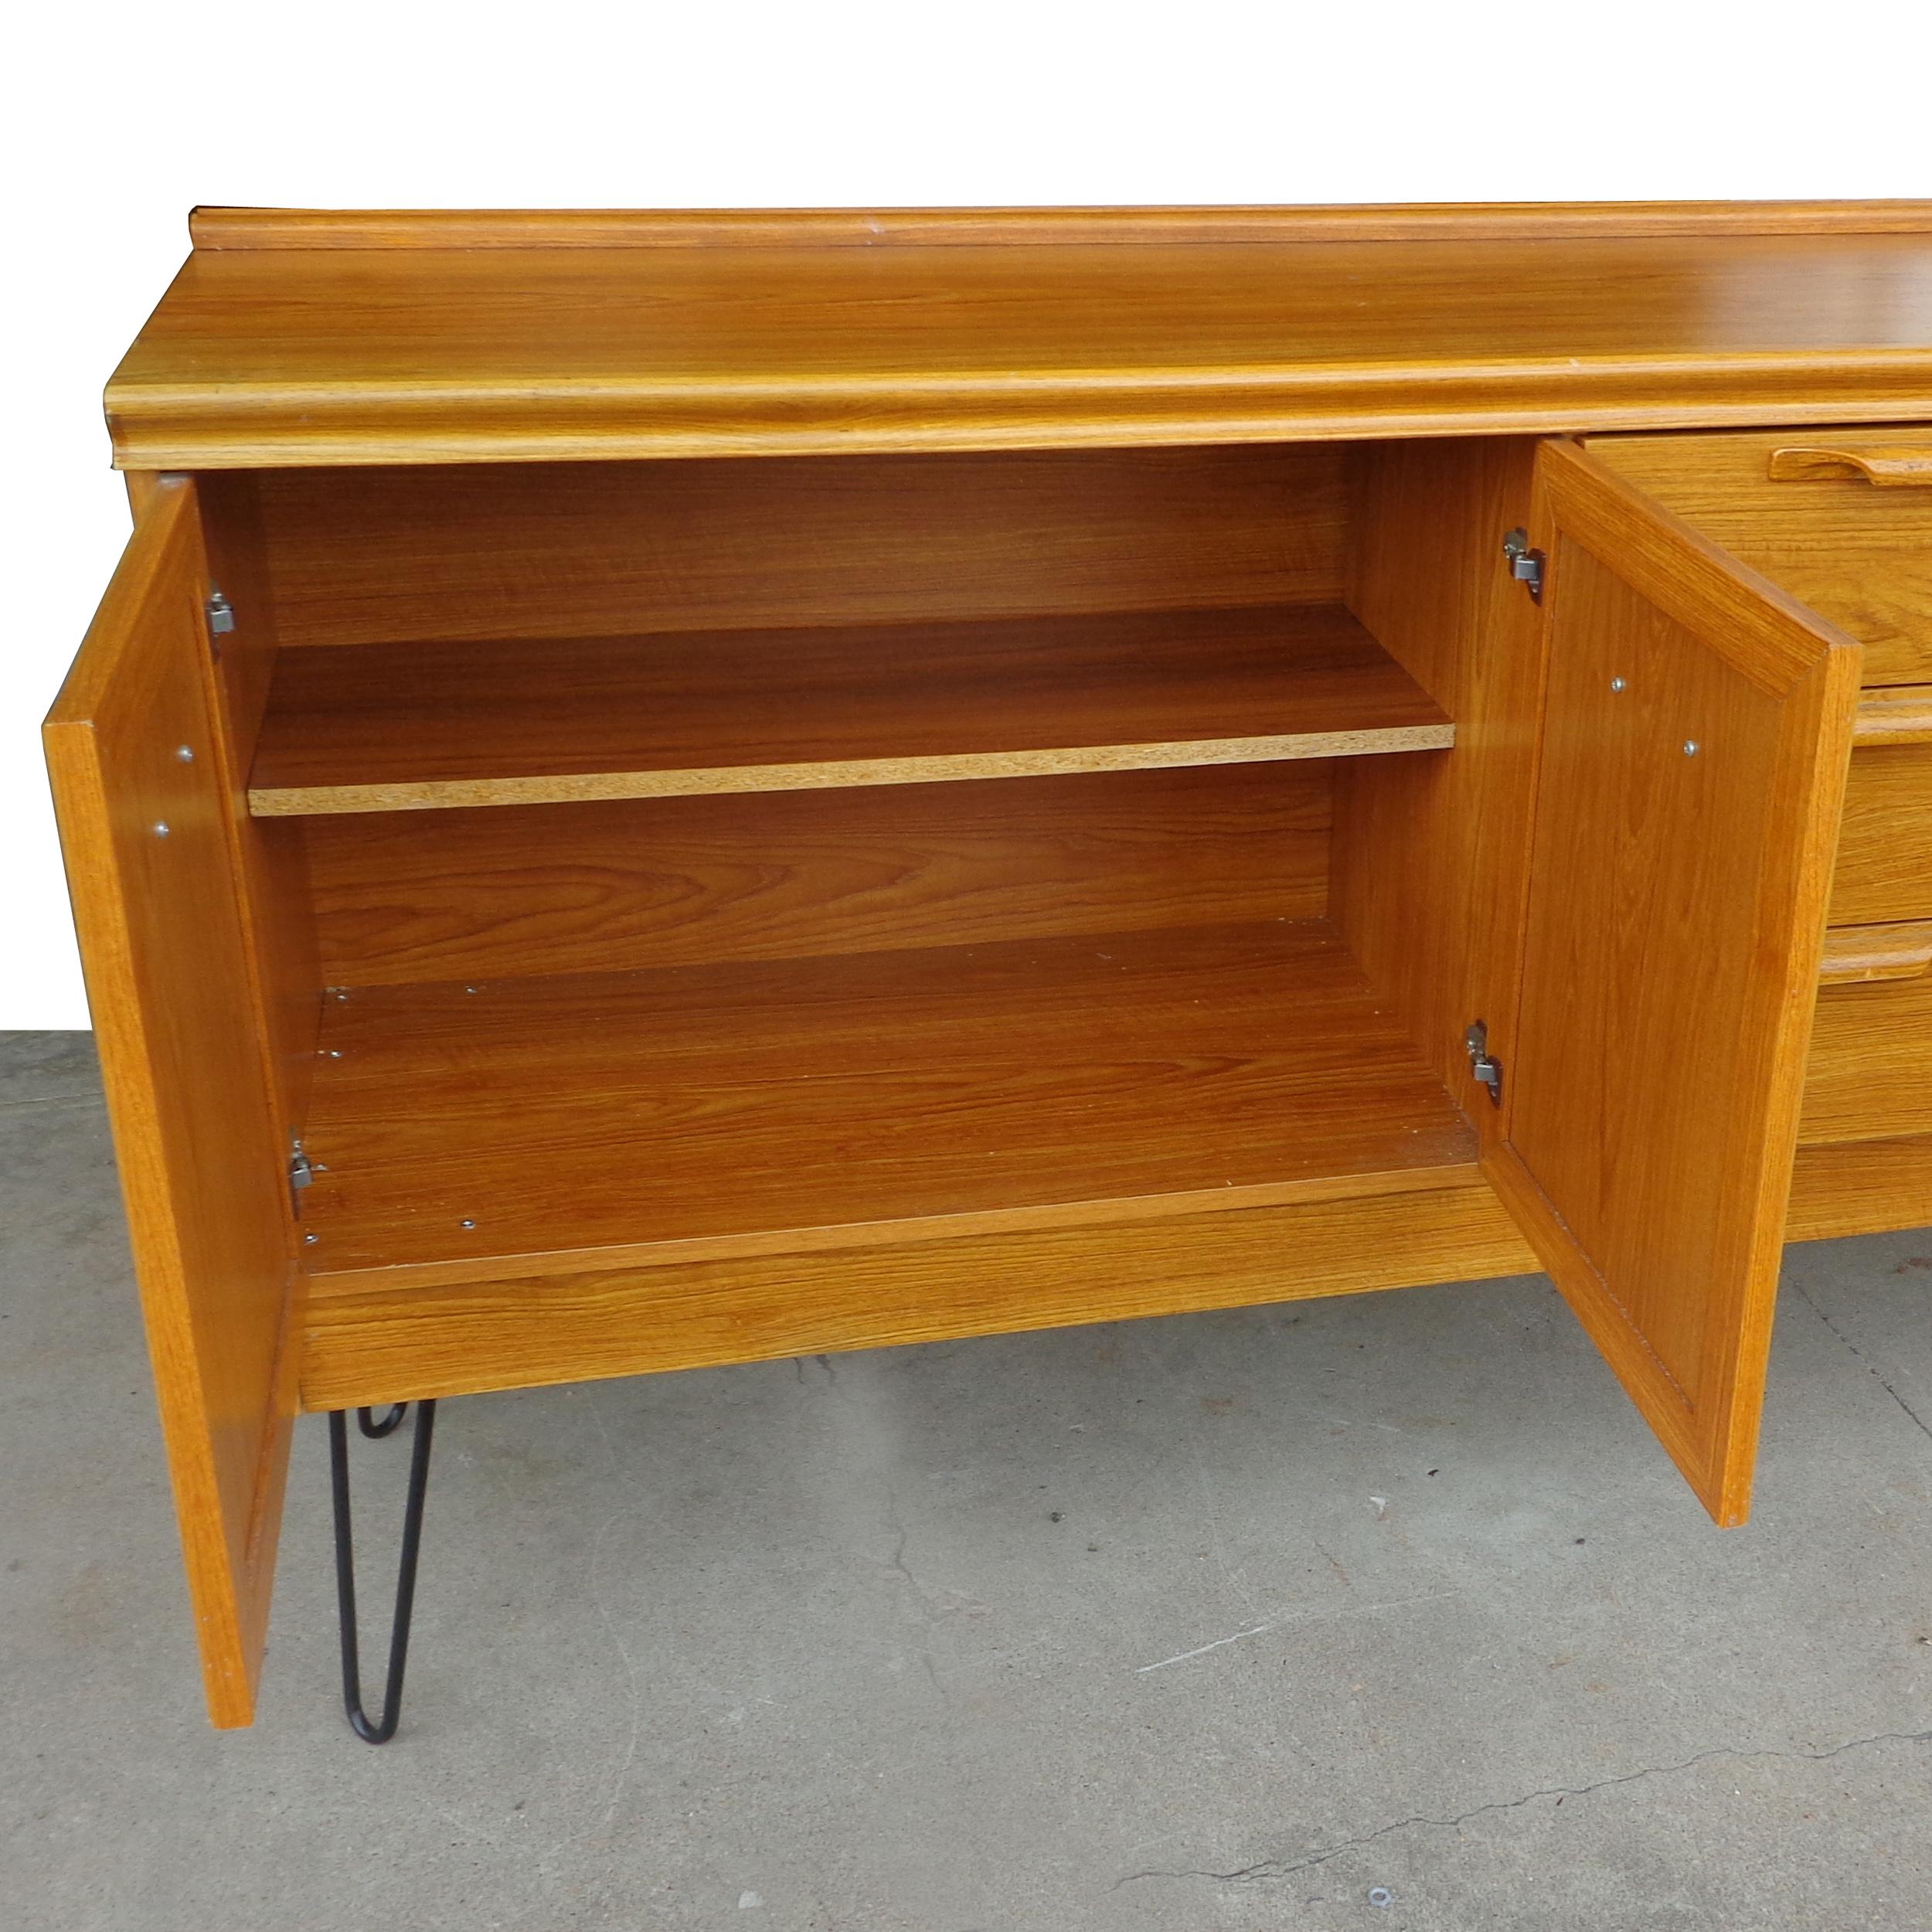 20th Century Mid-Century Modern Oak Sideboard with Hair Pin Legs by Jentique For Sale